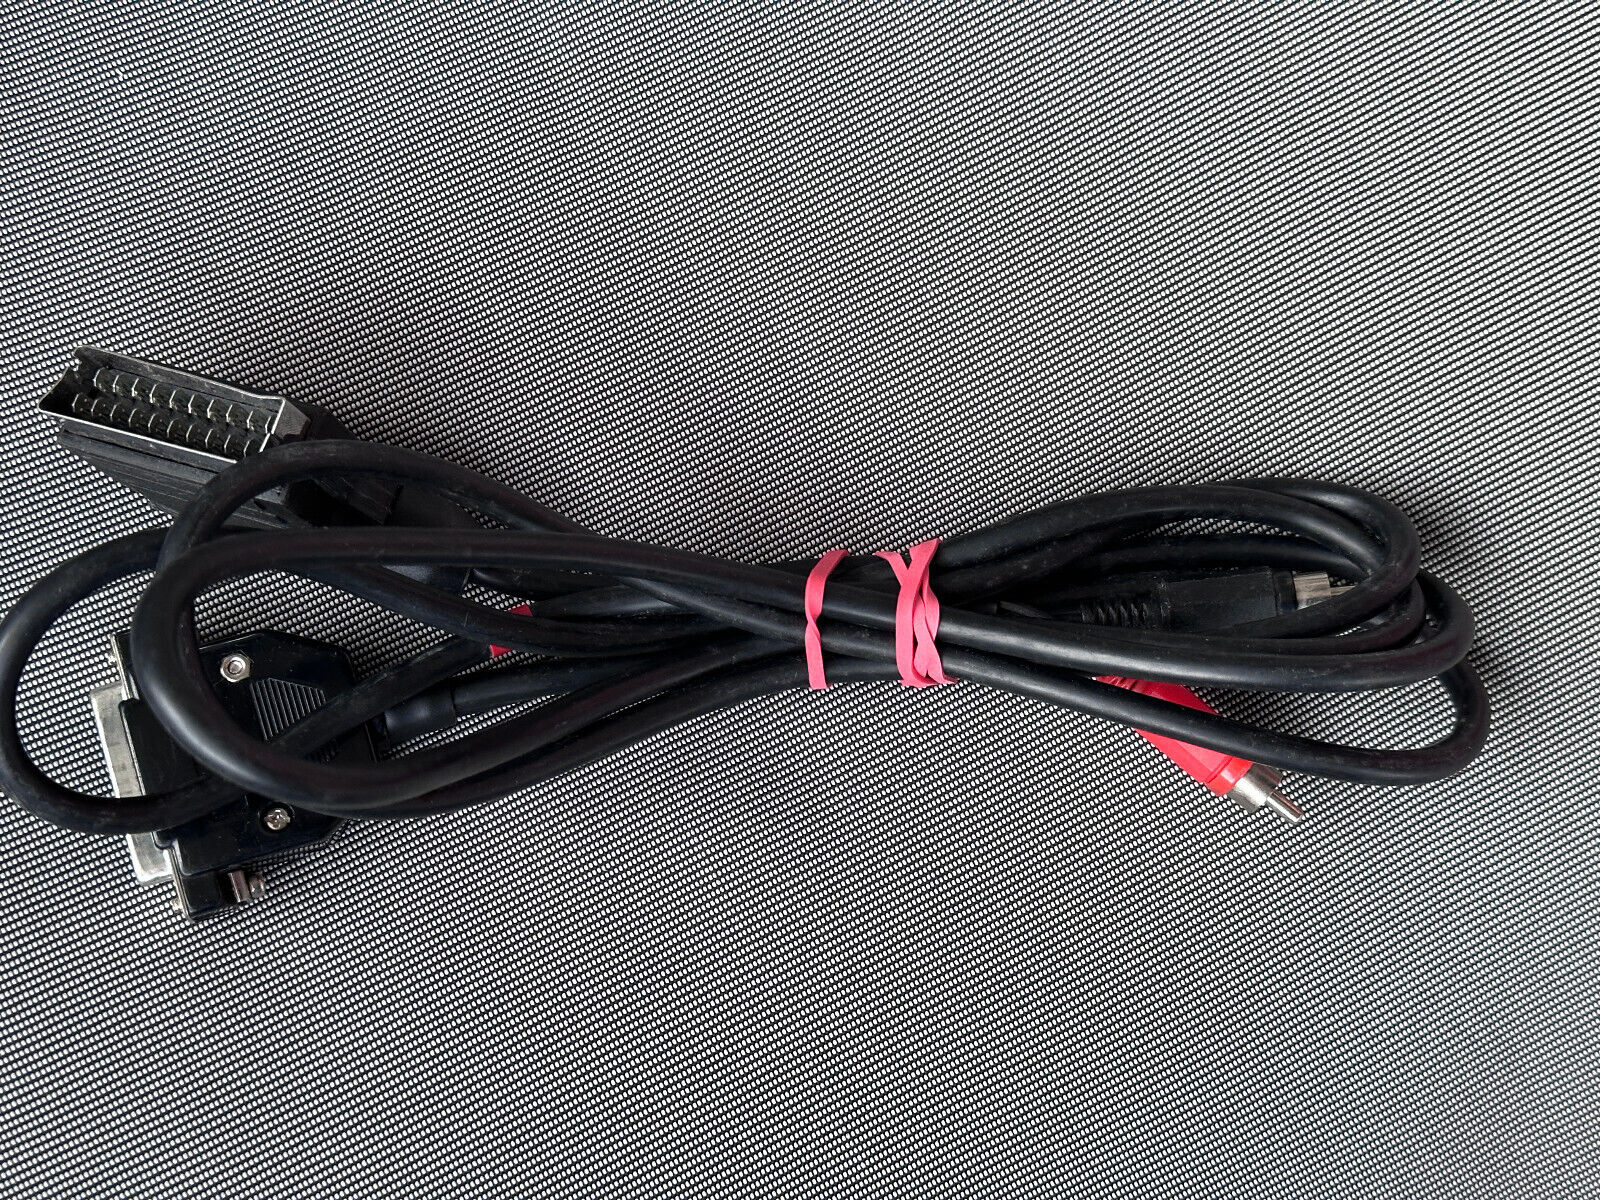 Skartkabel for Monitor 1084/S for Amiga 600, Commodore #06 24